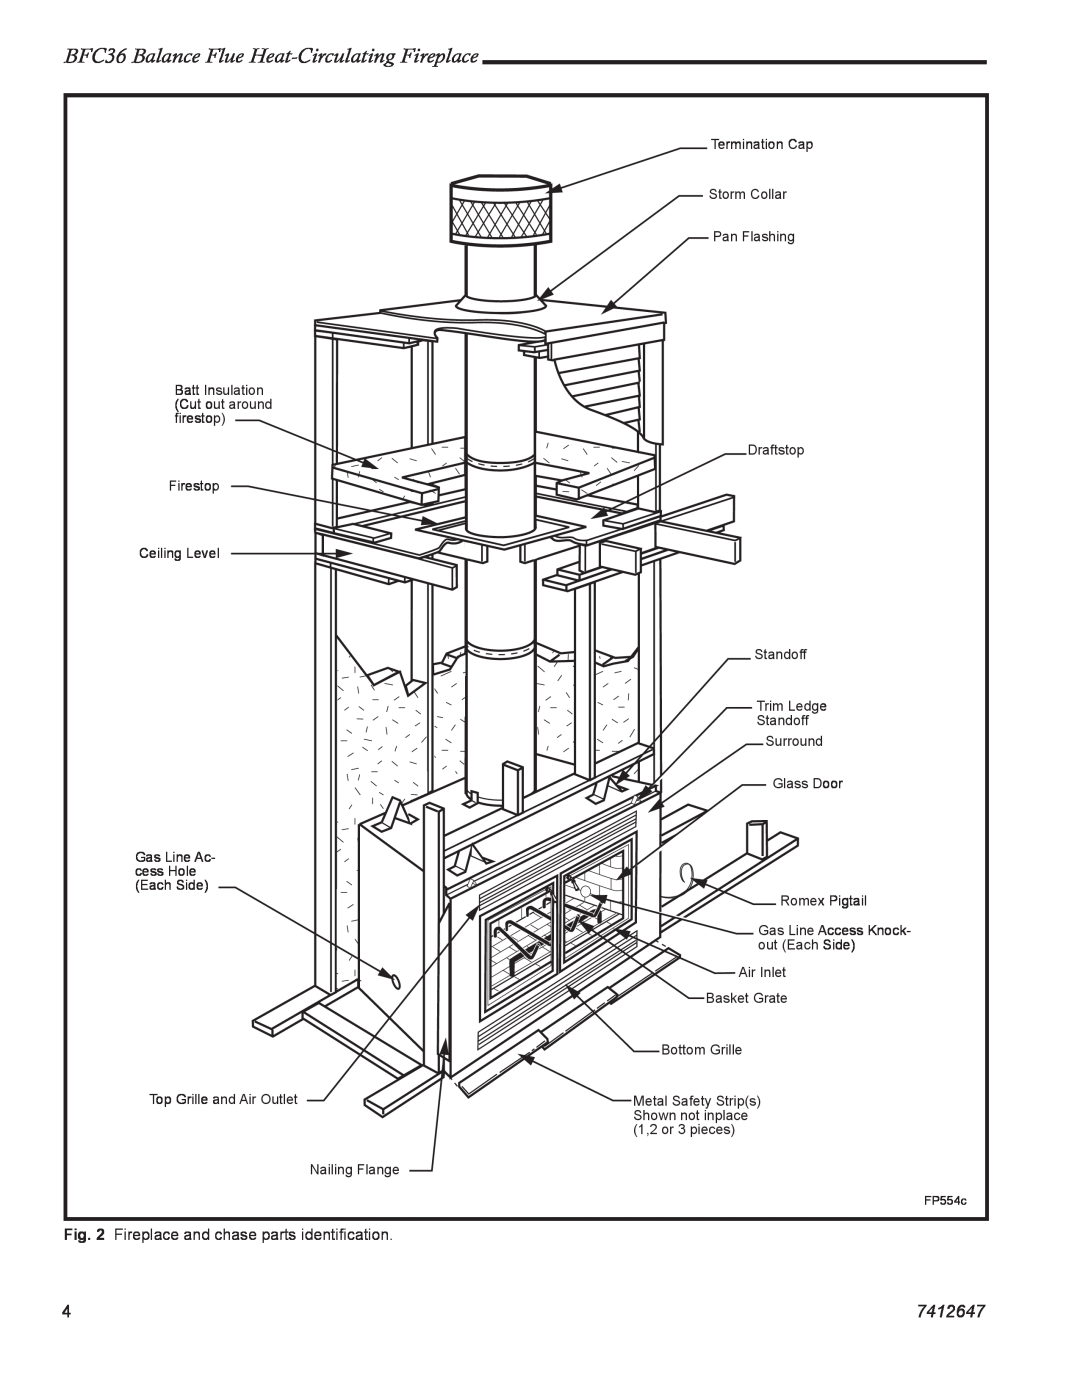 Vermont Casting 647 BFC BFC36 Balance Flue Heat-CirculatingFireplace, 7412647, Fireplace and chase parts identiﬁcation 